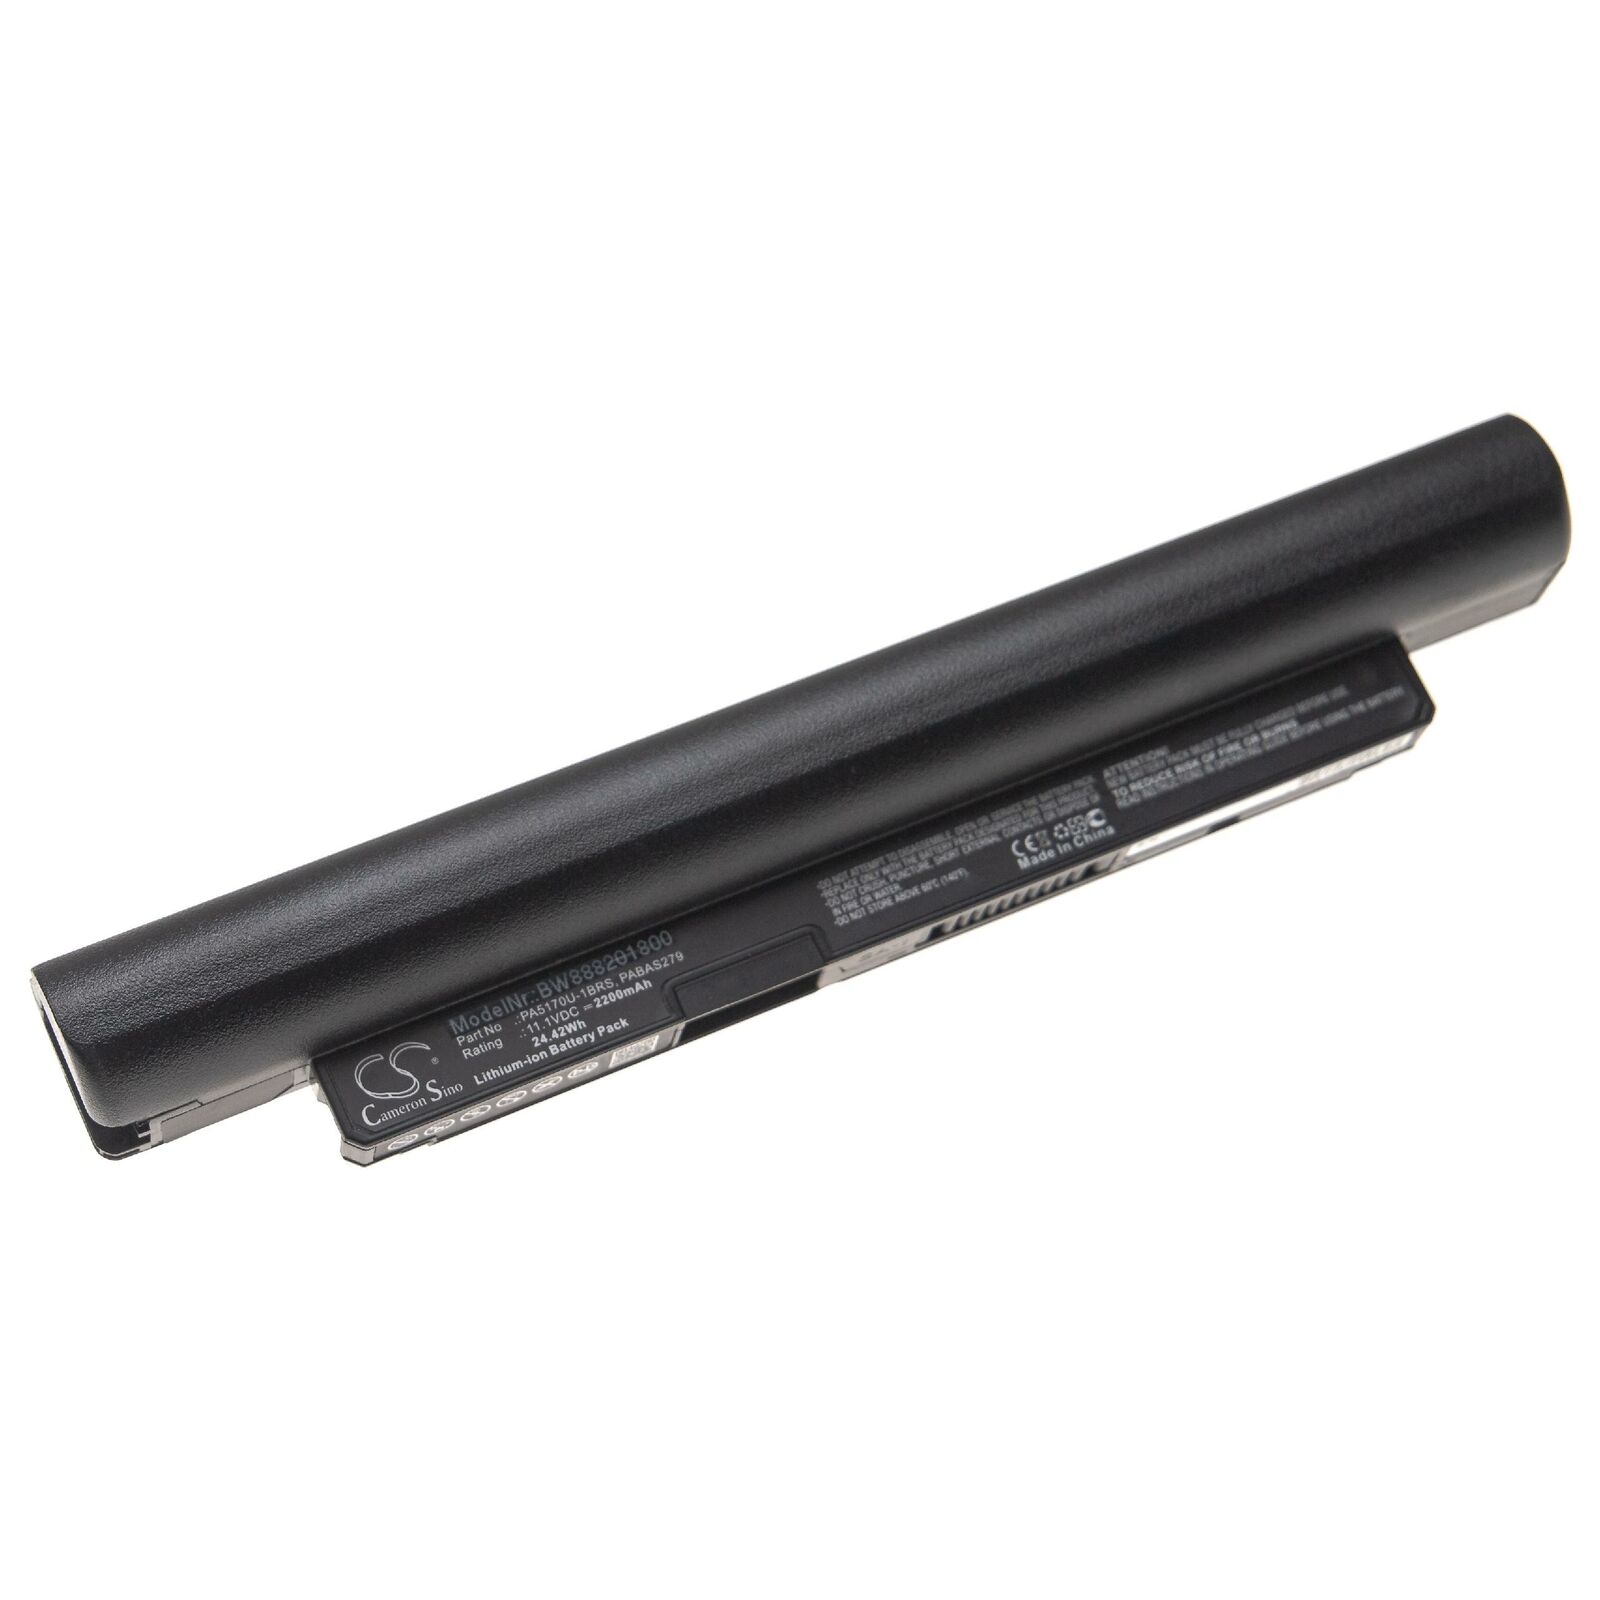 Toshiba Satellite Pro NB10, NB10-A, NB10t, NB10t-A compatible battery